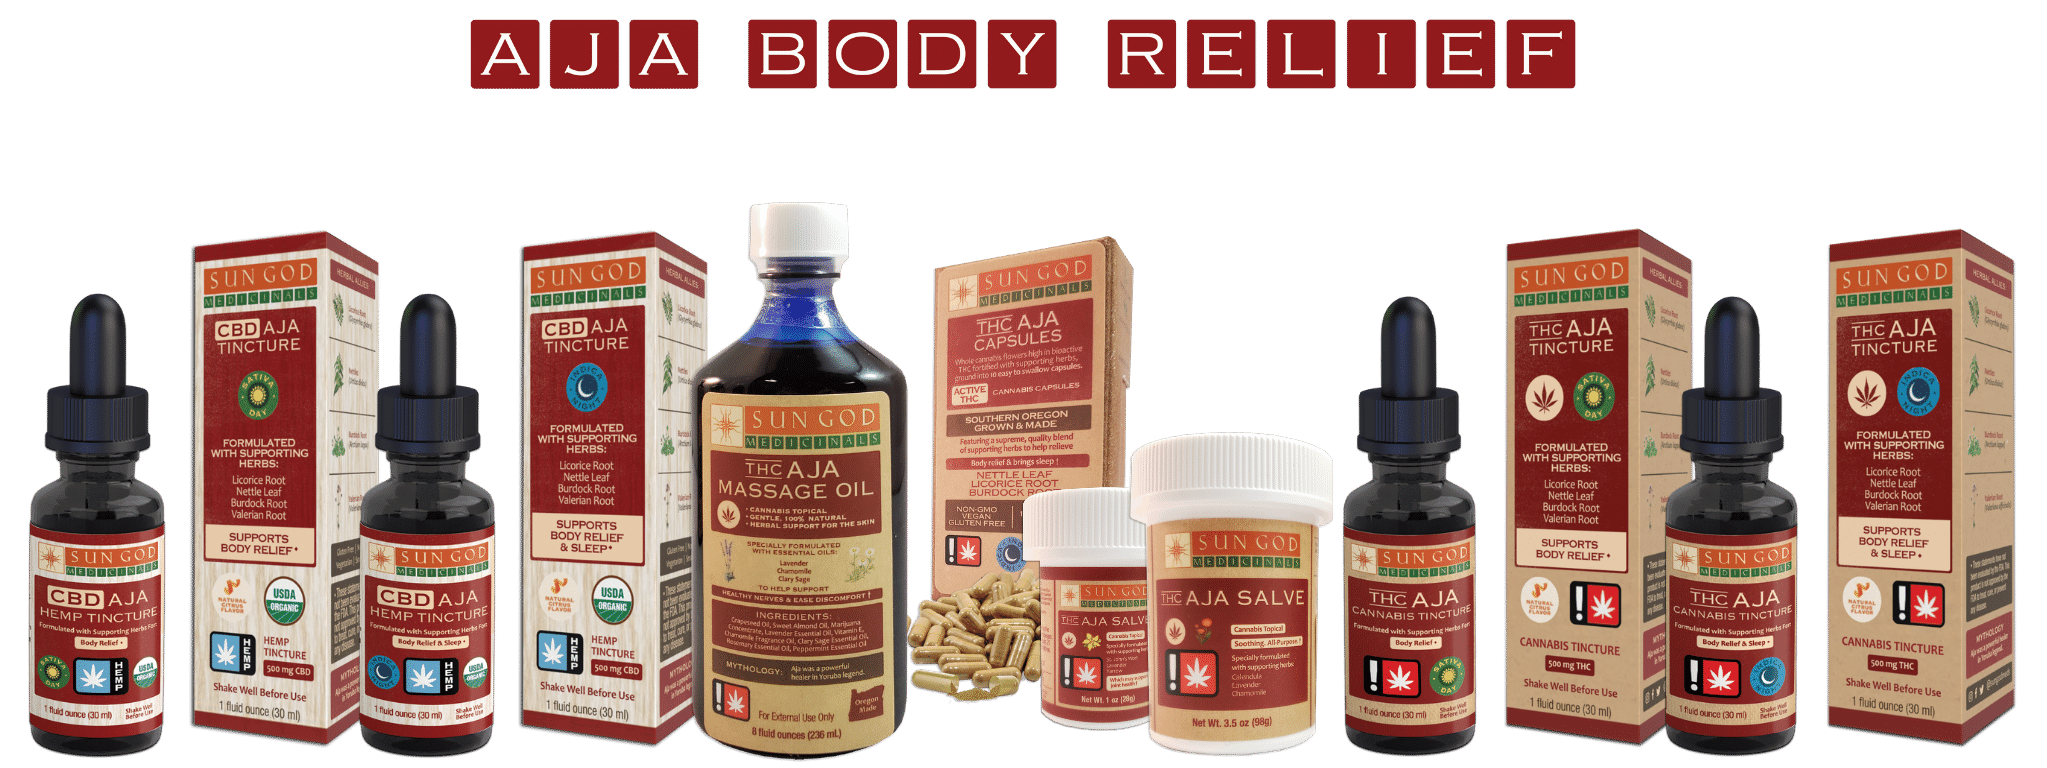 Herbal Products For Body Relief - by Sun God Medicinals